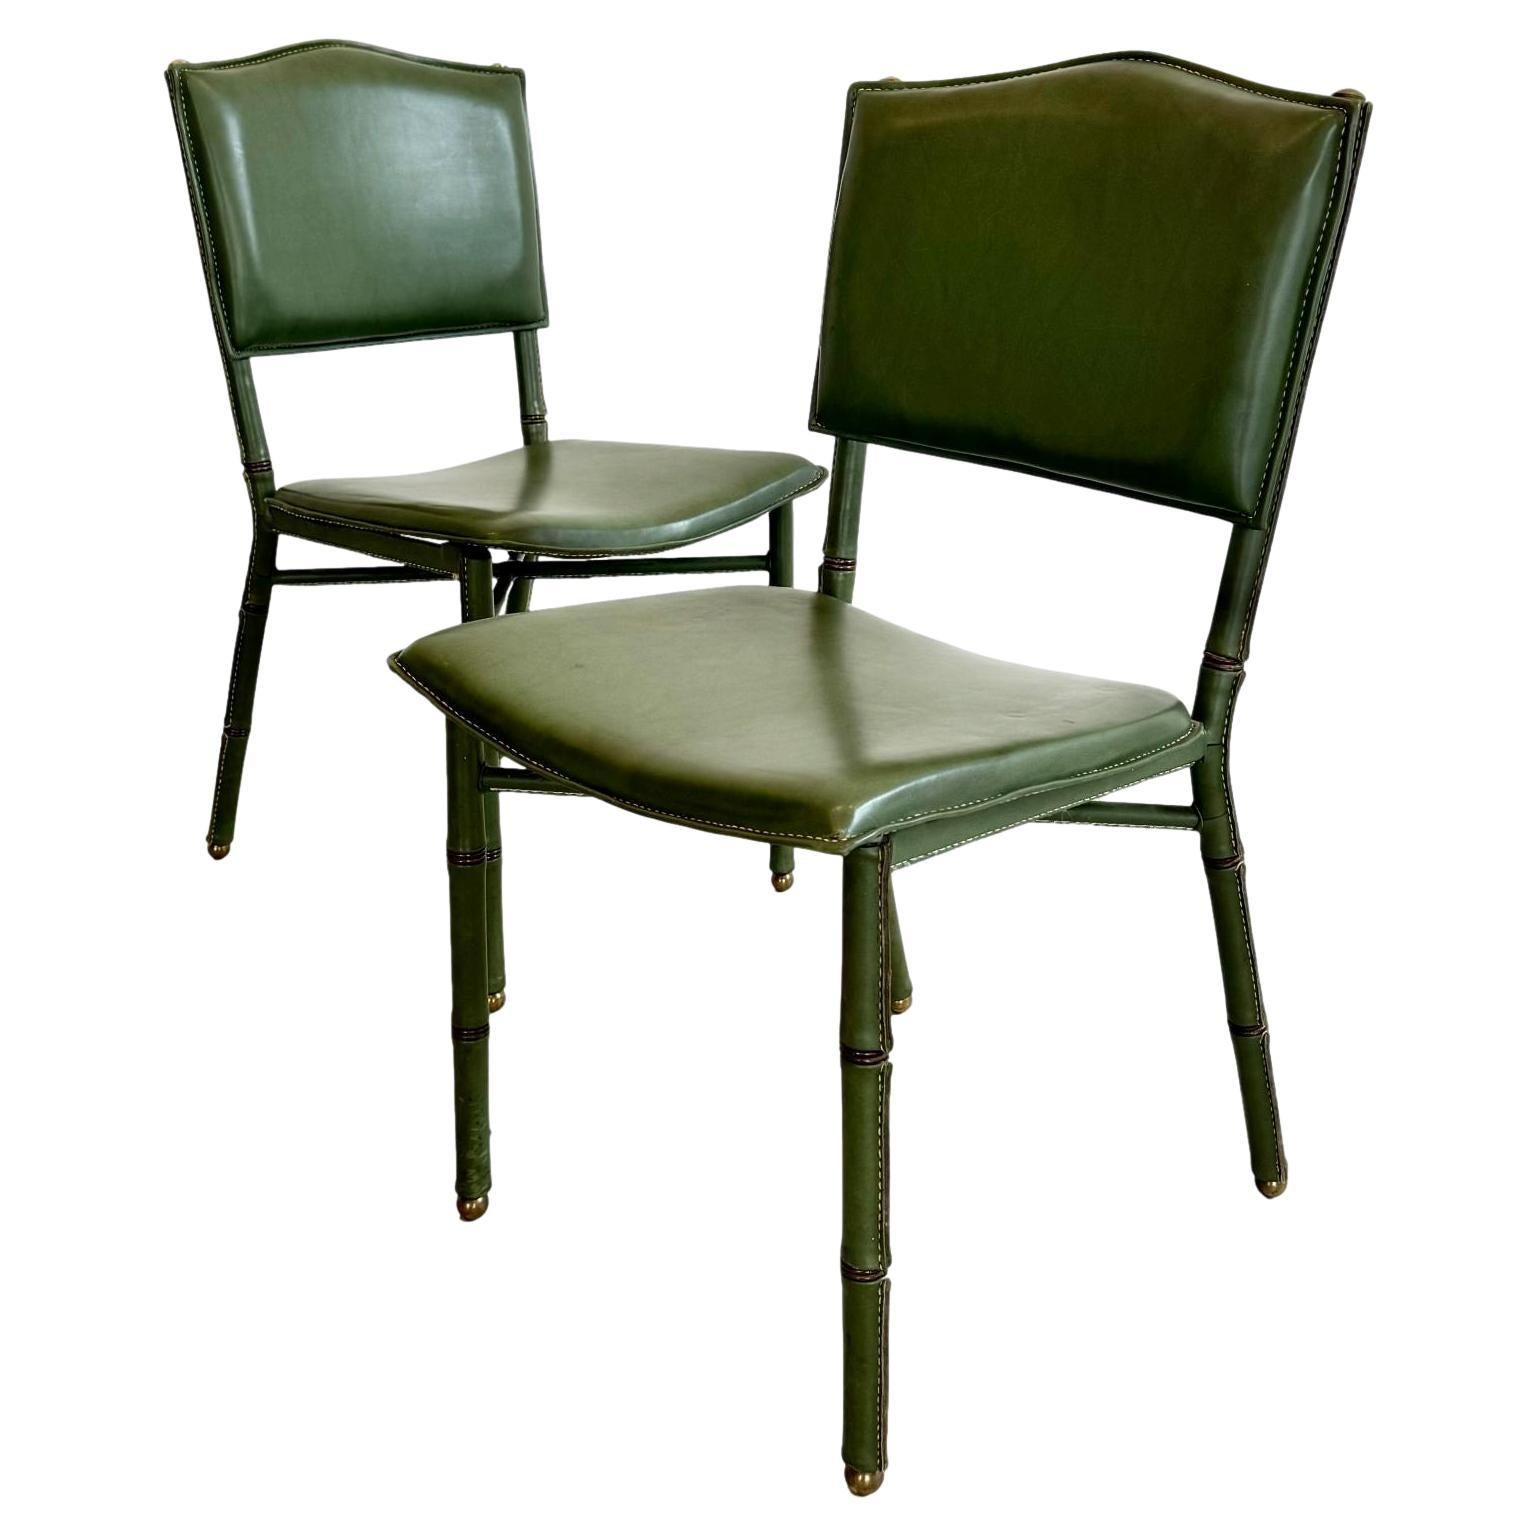 Jacques Adnet Green Leather Chairs, Circa 1950s, France For Sale